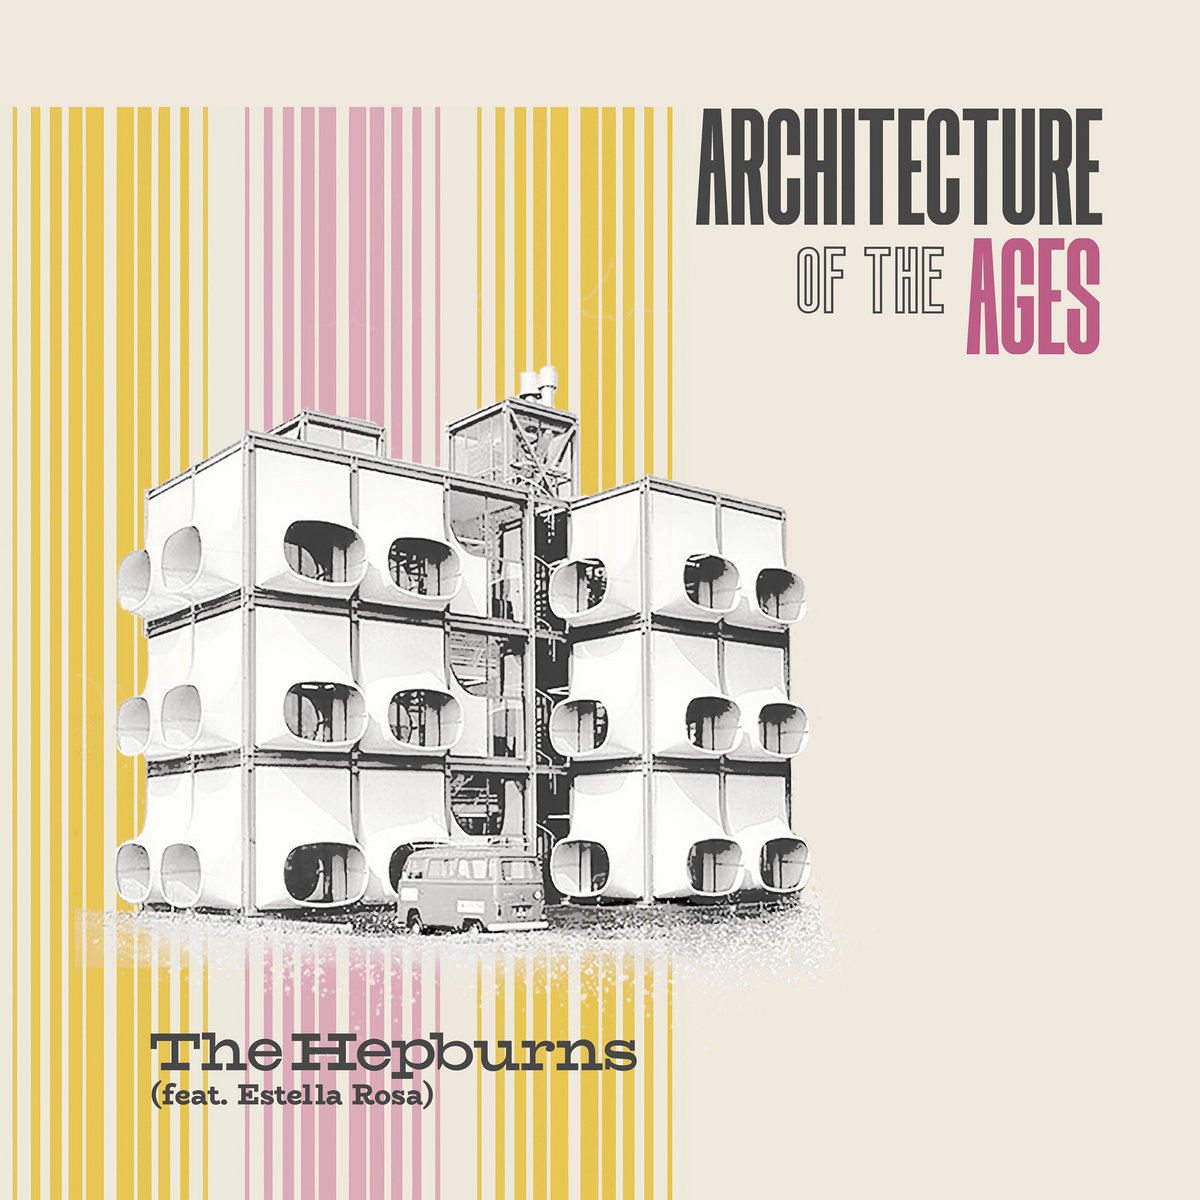 The Hepburns "Architecture of the ages" LP